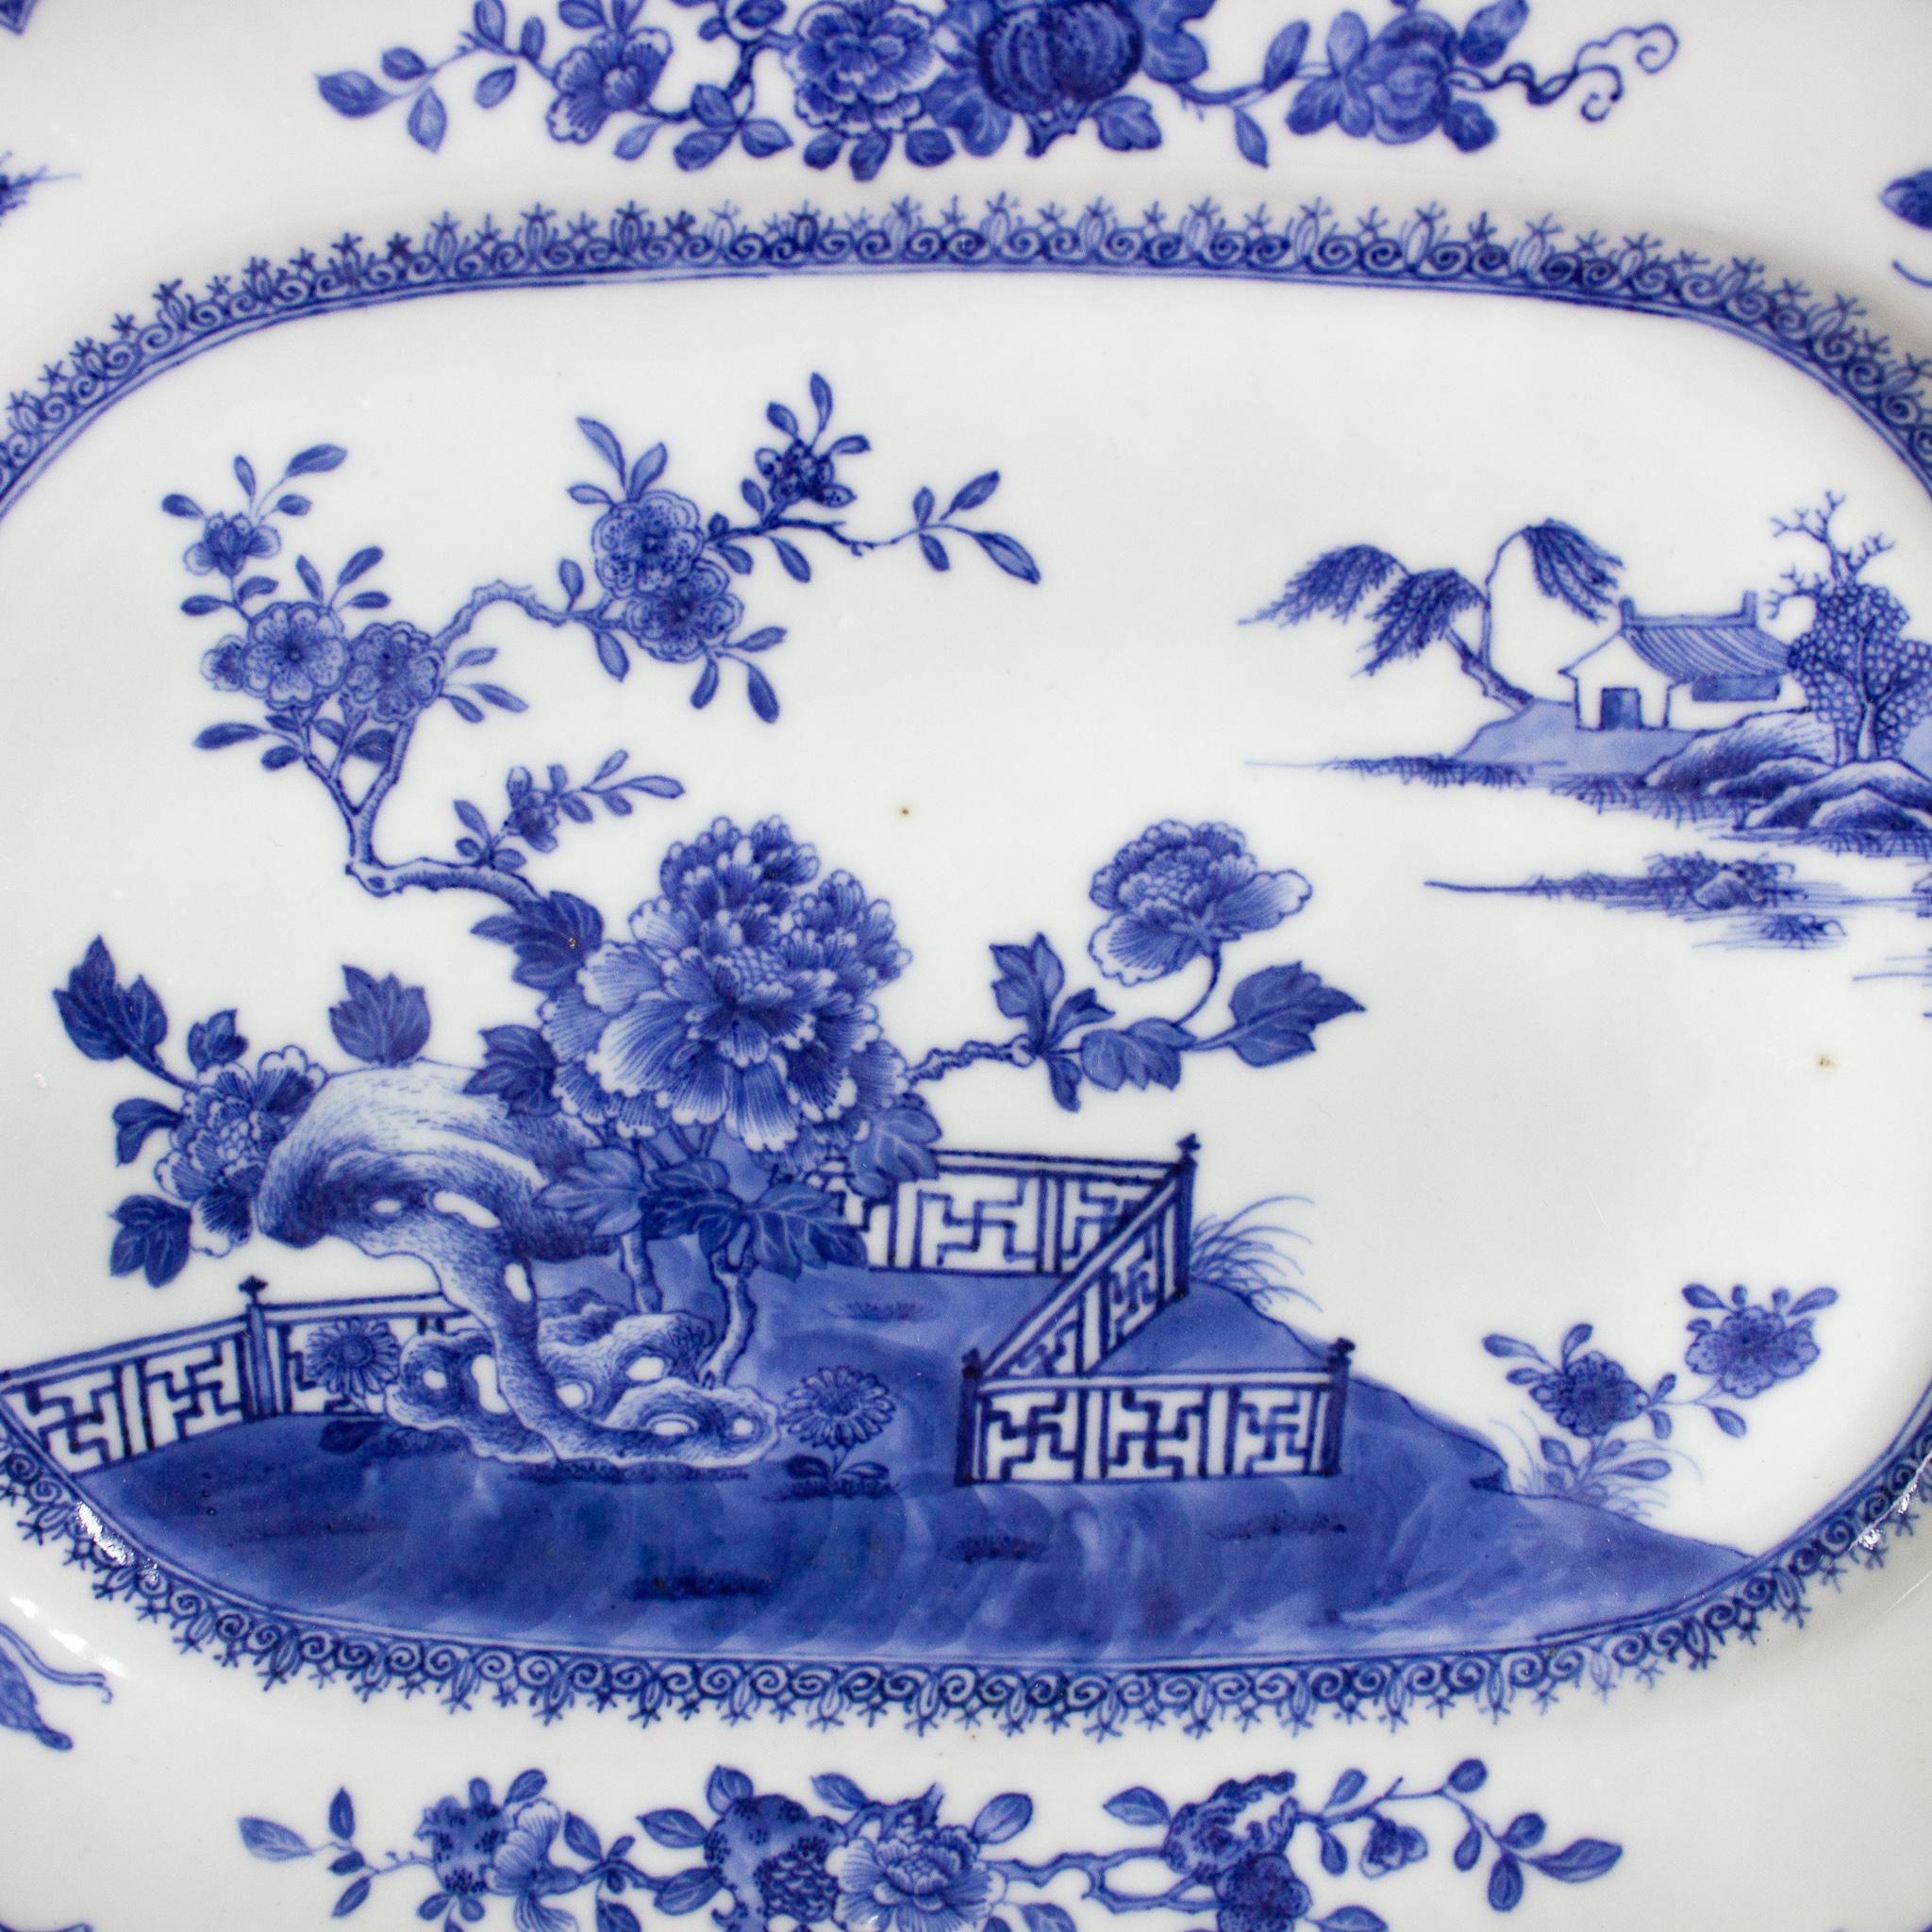 A Chinese Porcelain pair of octogonal platters, East India Company, Qing Dynasty (1644-1912), Qianlong Period (1736-1795). The rim is decorated with underglaze blue depicting floral motifs, butterflies and grasshoppers, emblems of bliss, summer and